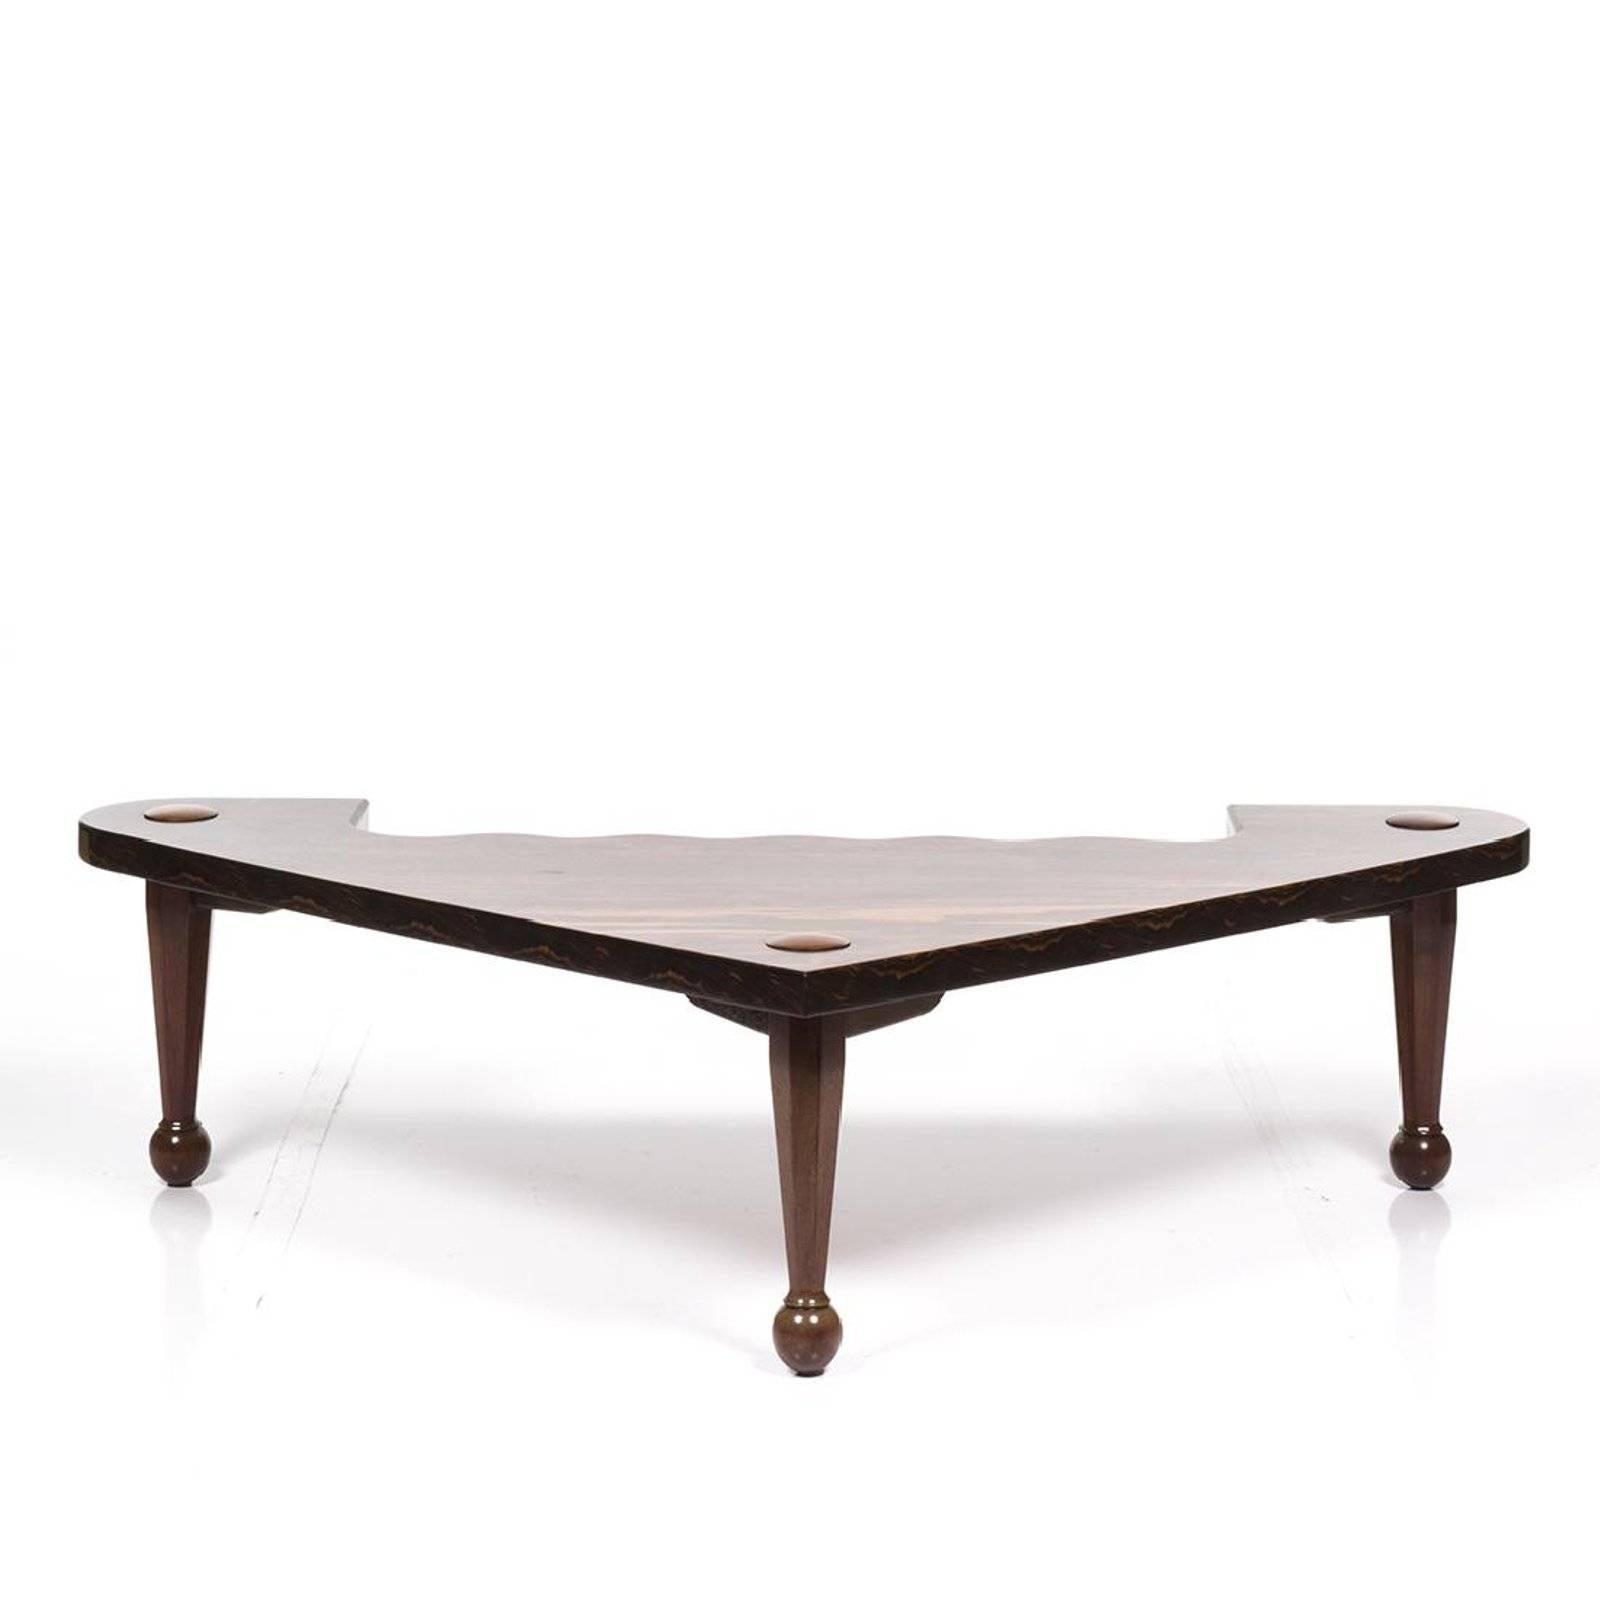 Sculptural Macassar ebony and mahogany Memphis style coffee table, 1980s. Extremely well crafted.